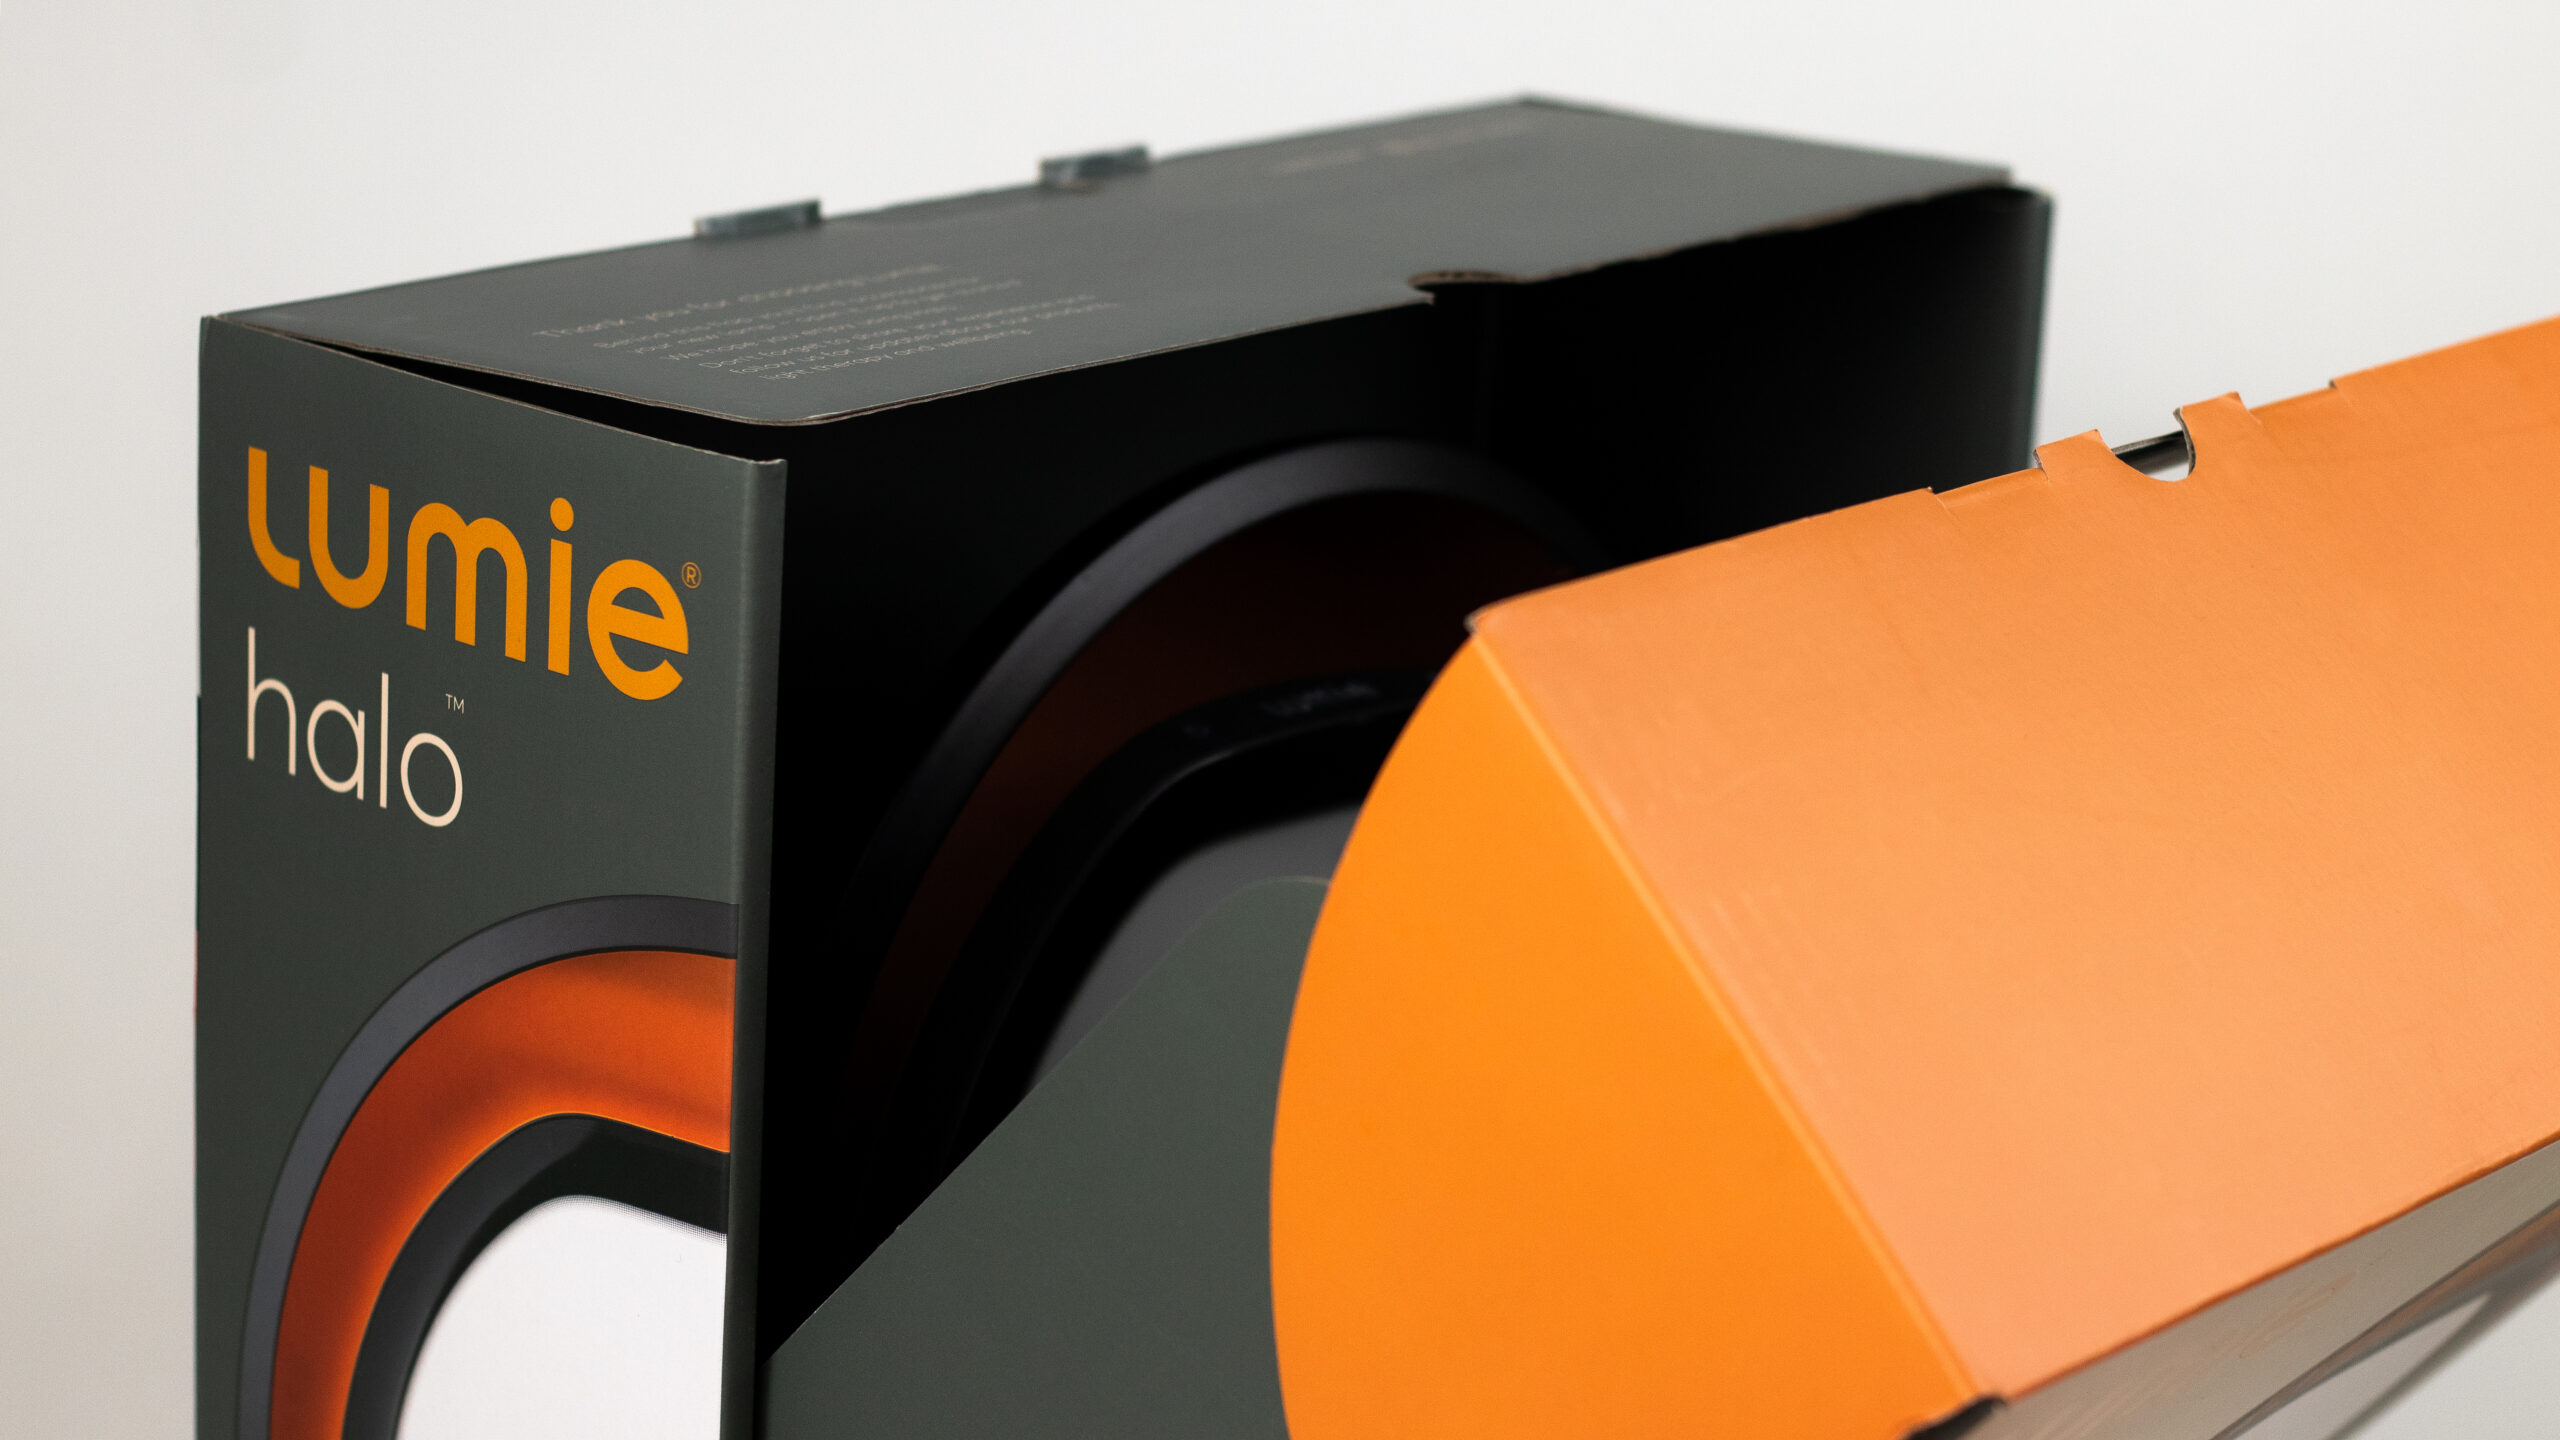 The product packaging 3D render in Unreal Engine for 'Lumie Halo', a multifunctional light therapy lamp. The box is predominantly orange and black with an image of the circular lamp on the front and the brand name 'Lumie' at the top. 